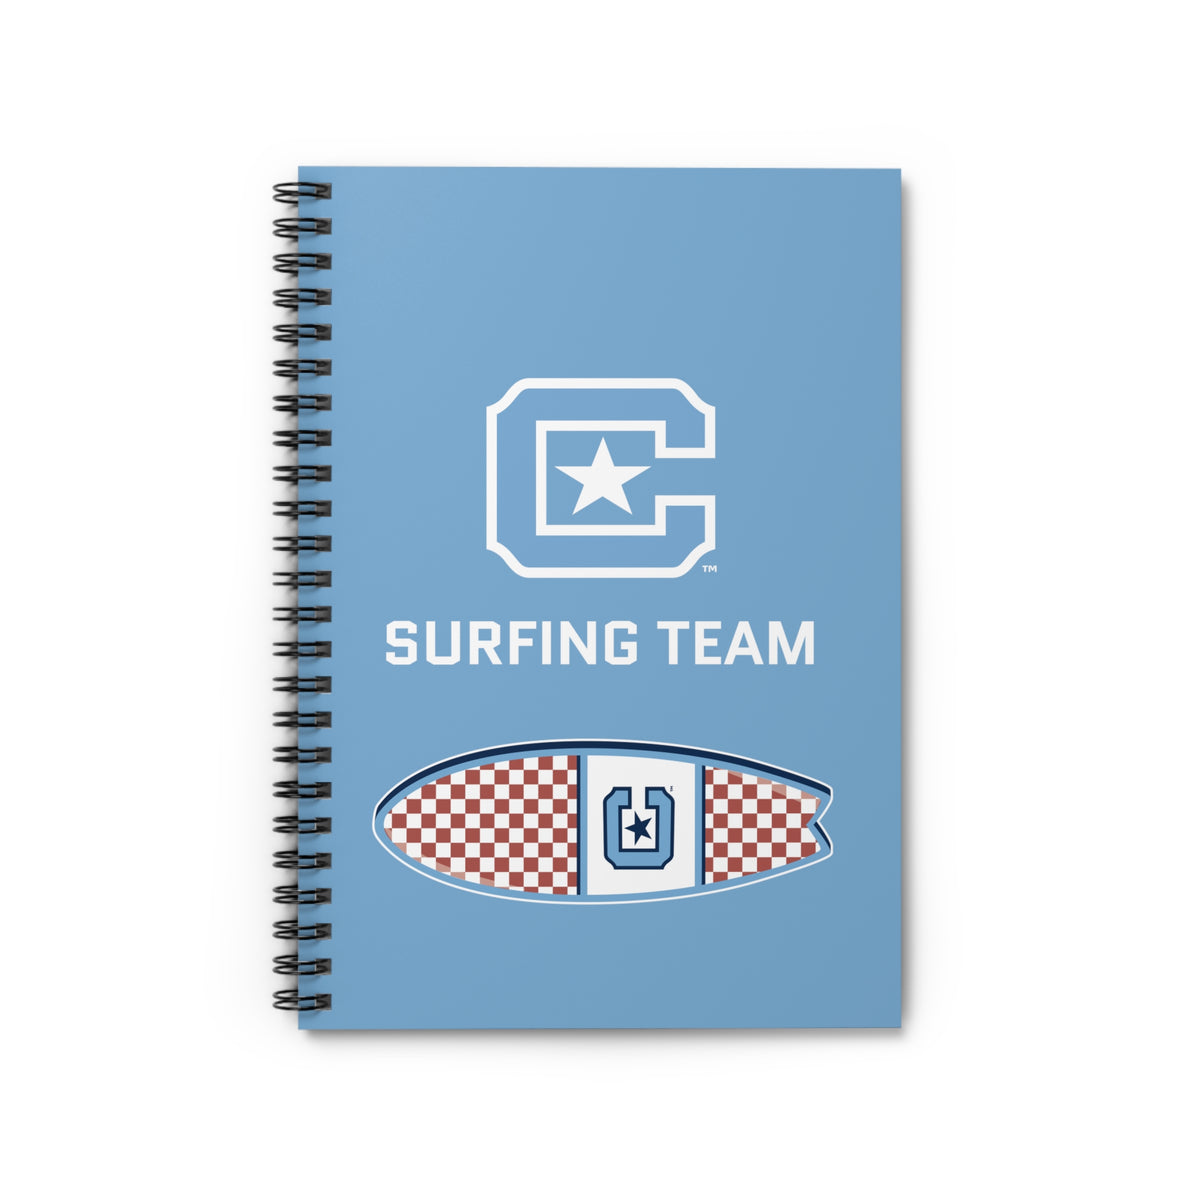 The Citadel, Surfing Team, Spiral Notebook - Ruled Line